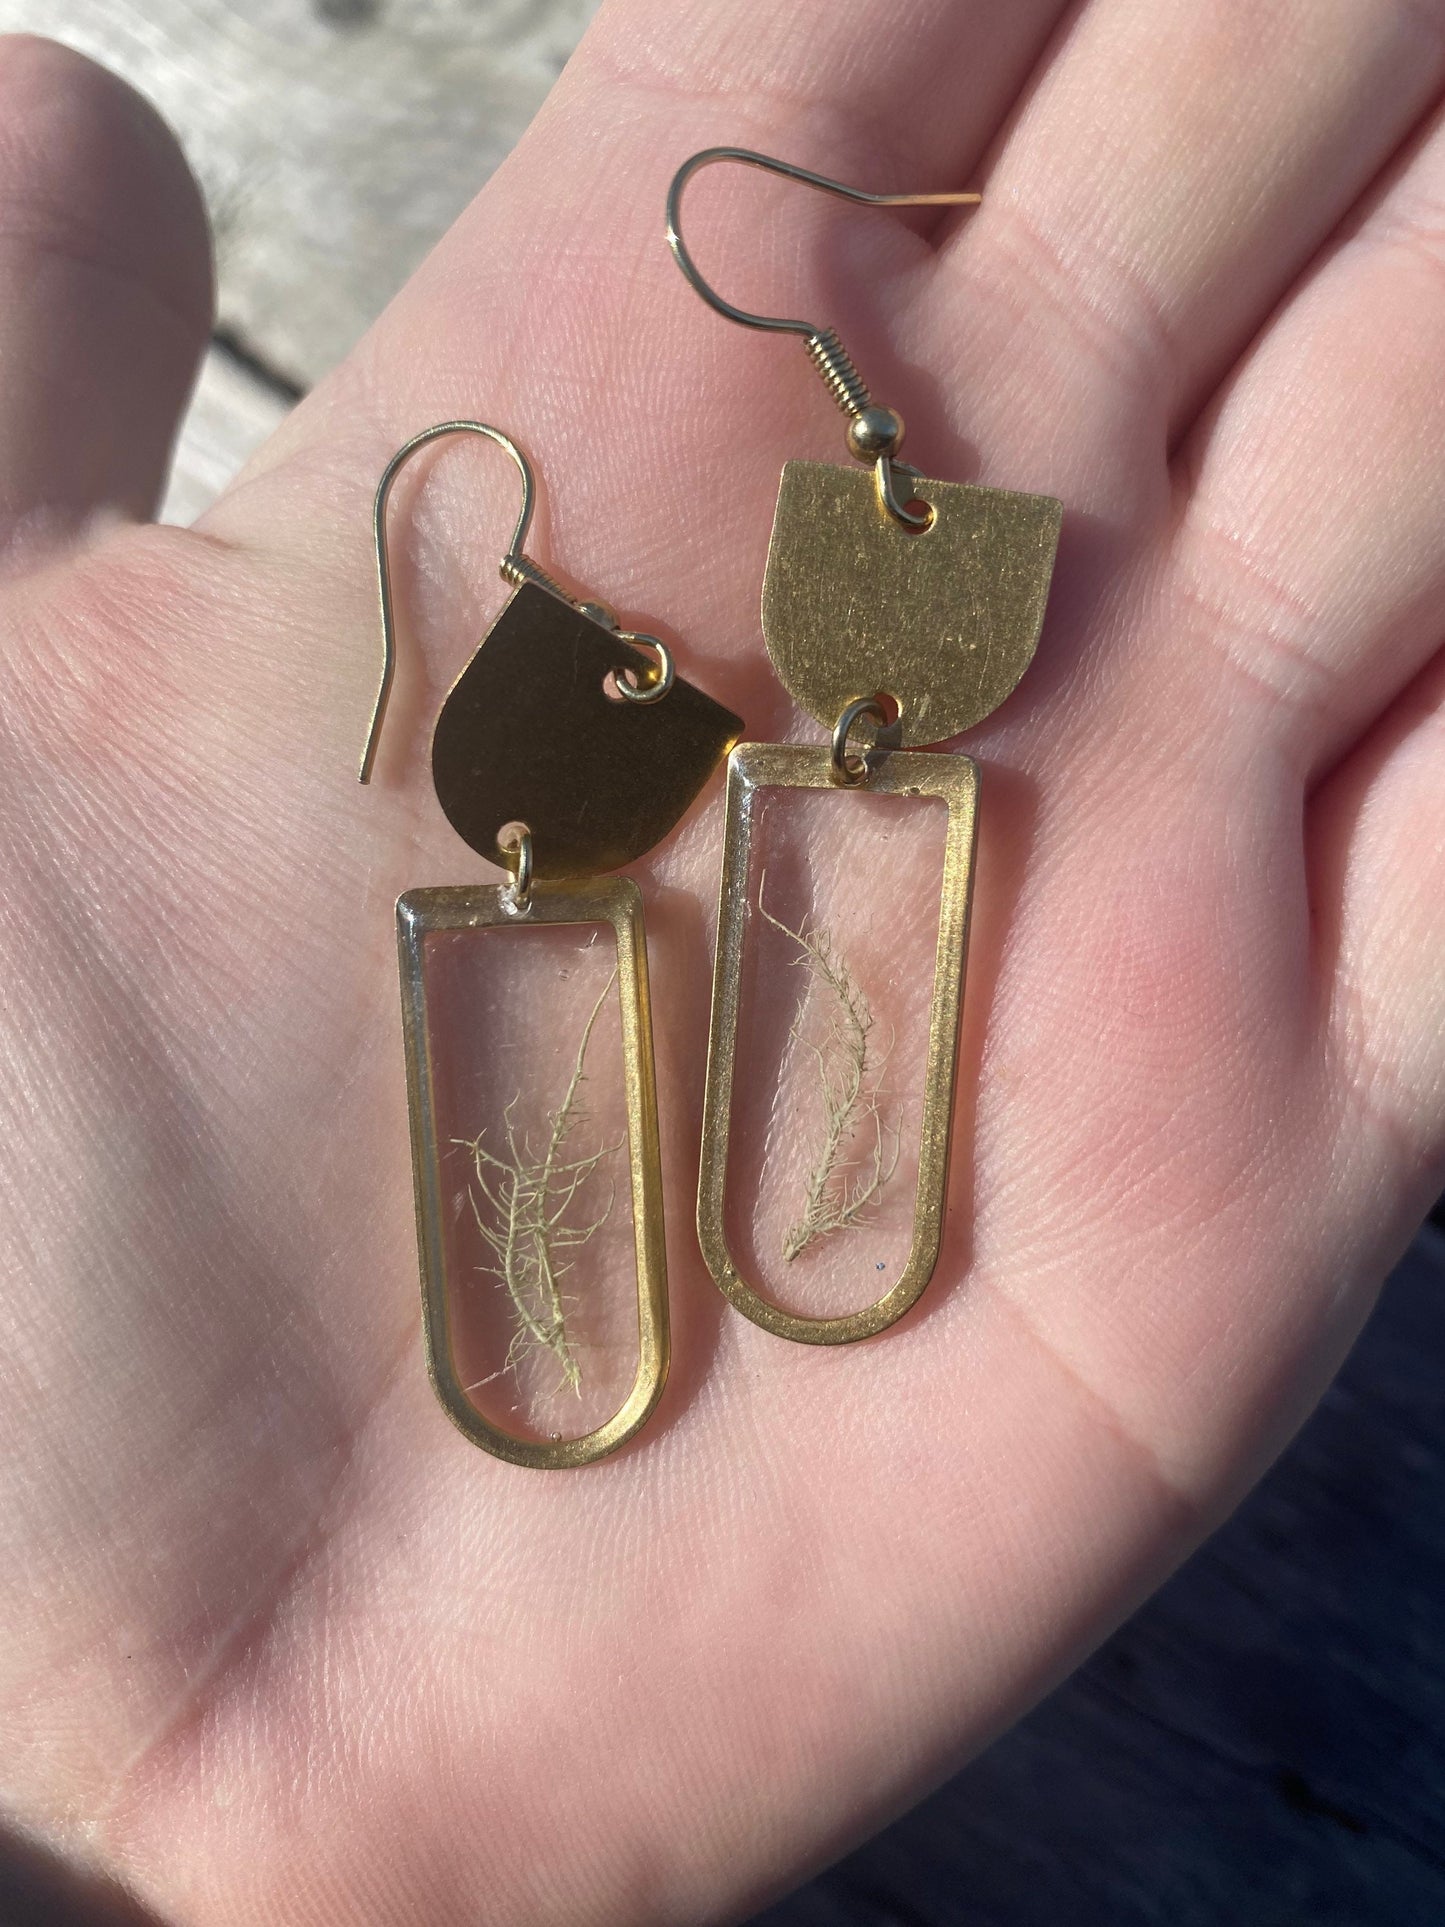 Pressed lichen and resin dangle earrings